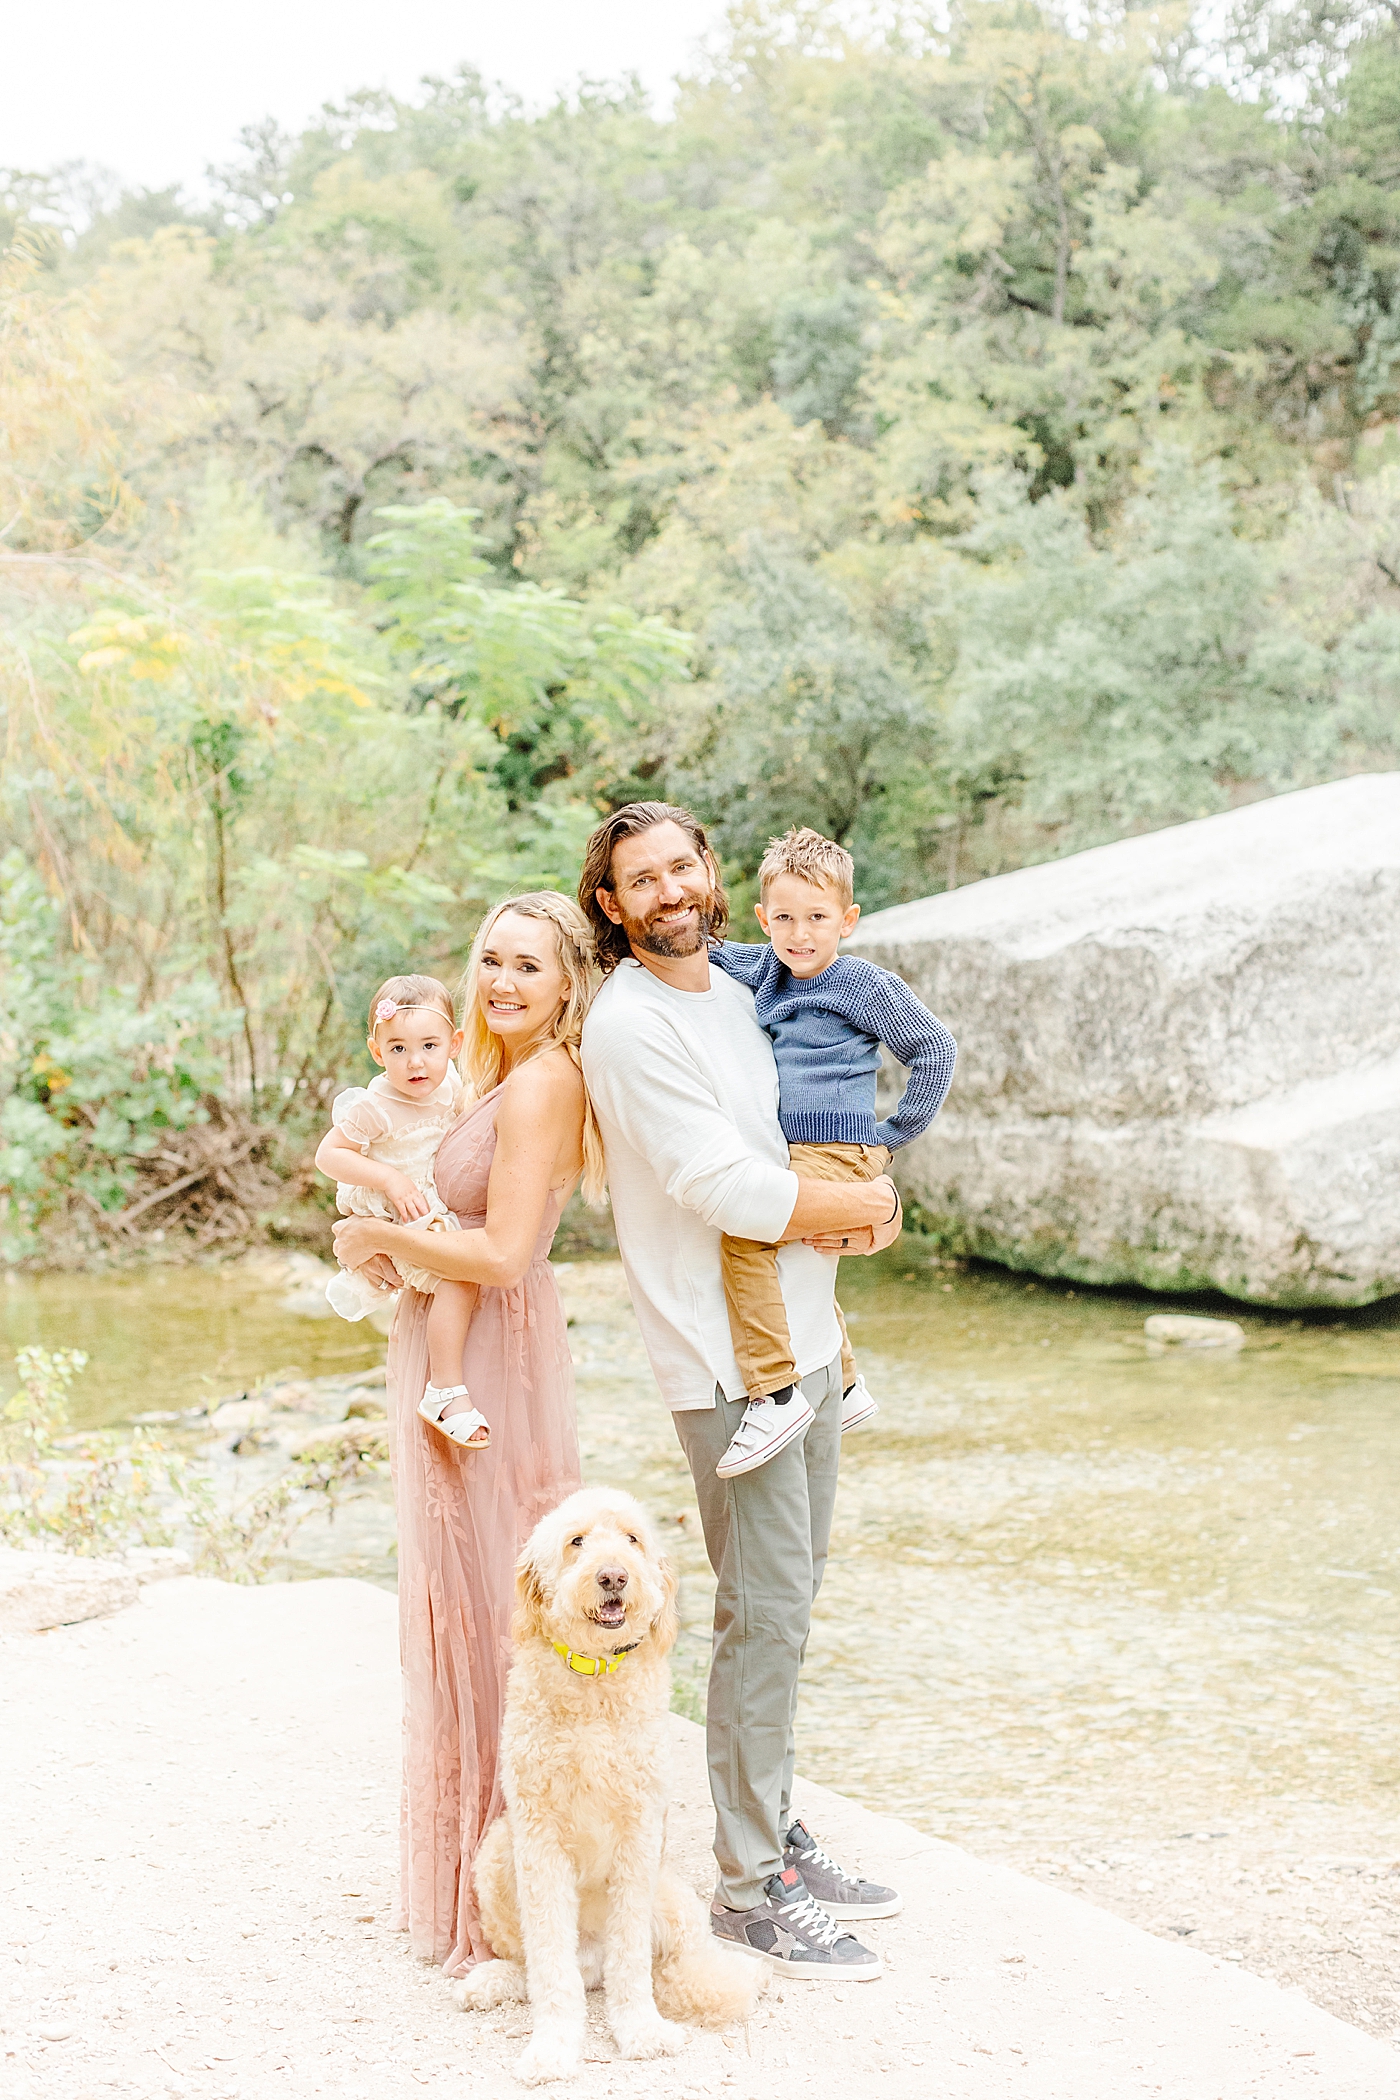 Mom and dad with their kids and dog near water | Outdoor Family Sessions with Sana Ahmed Photography